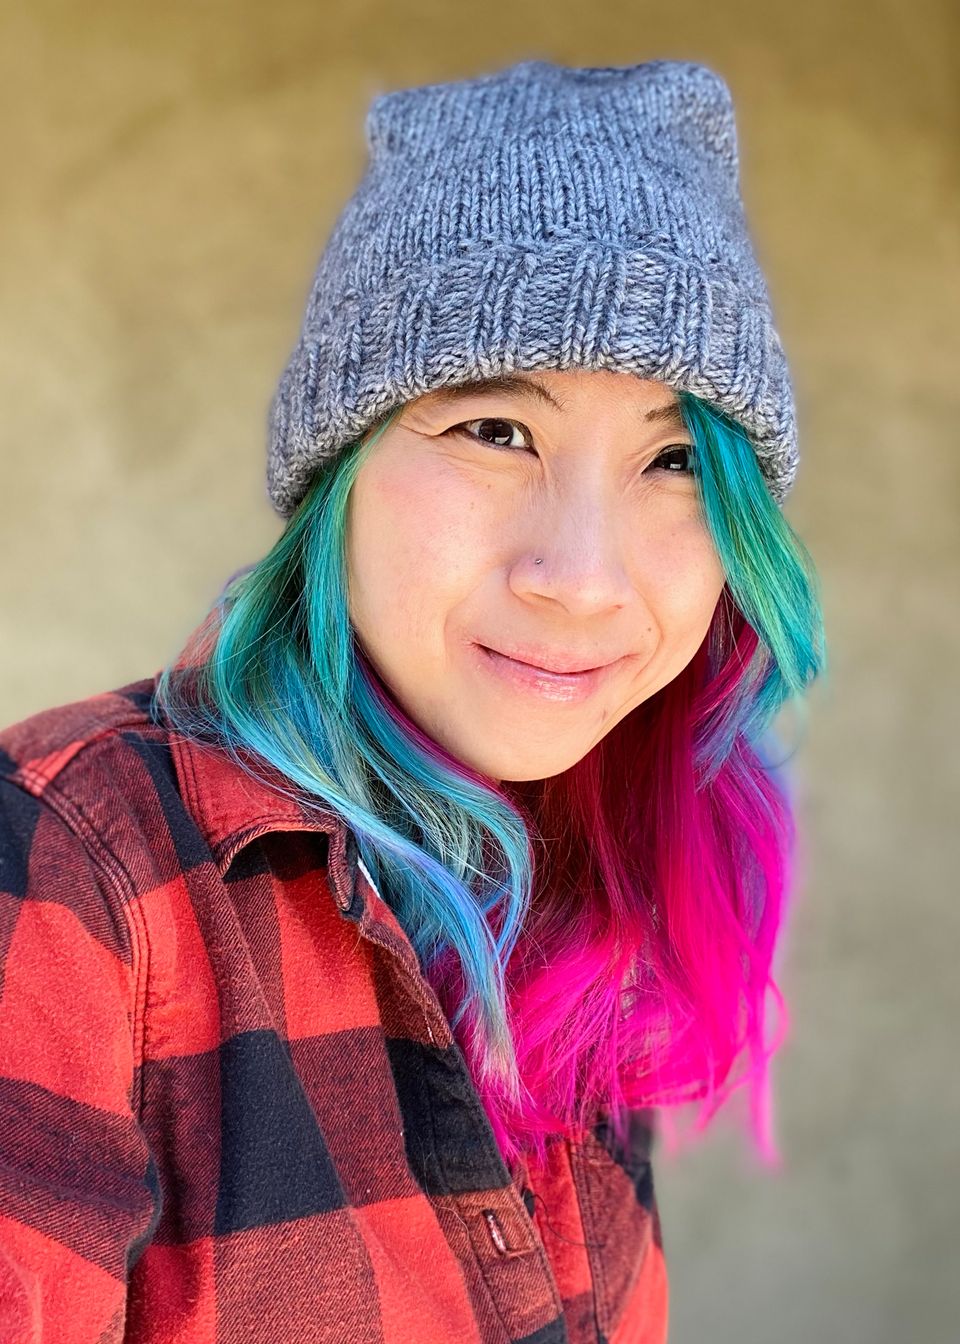 A Chinese-American person with brightly colored pink and blue hair, smirking goofily at the camera.